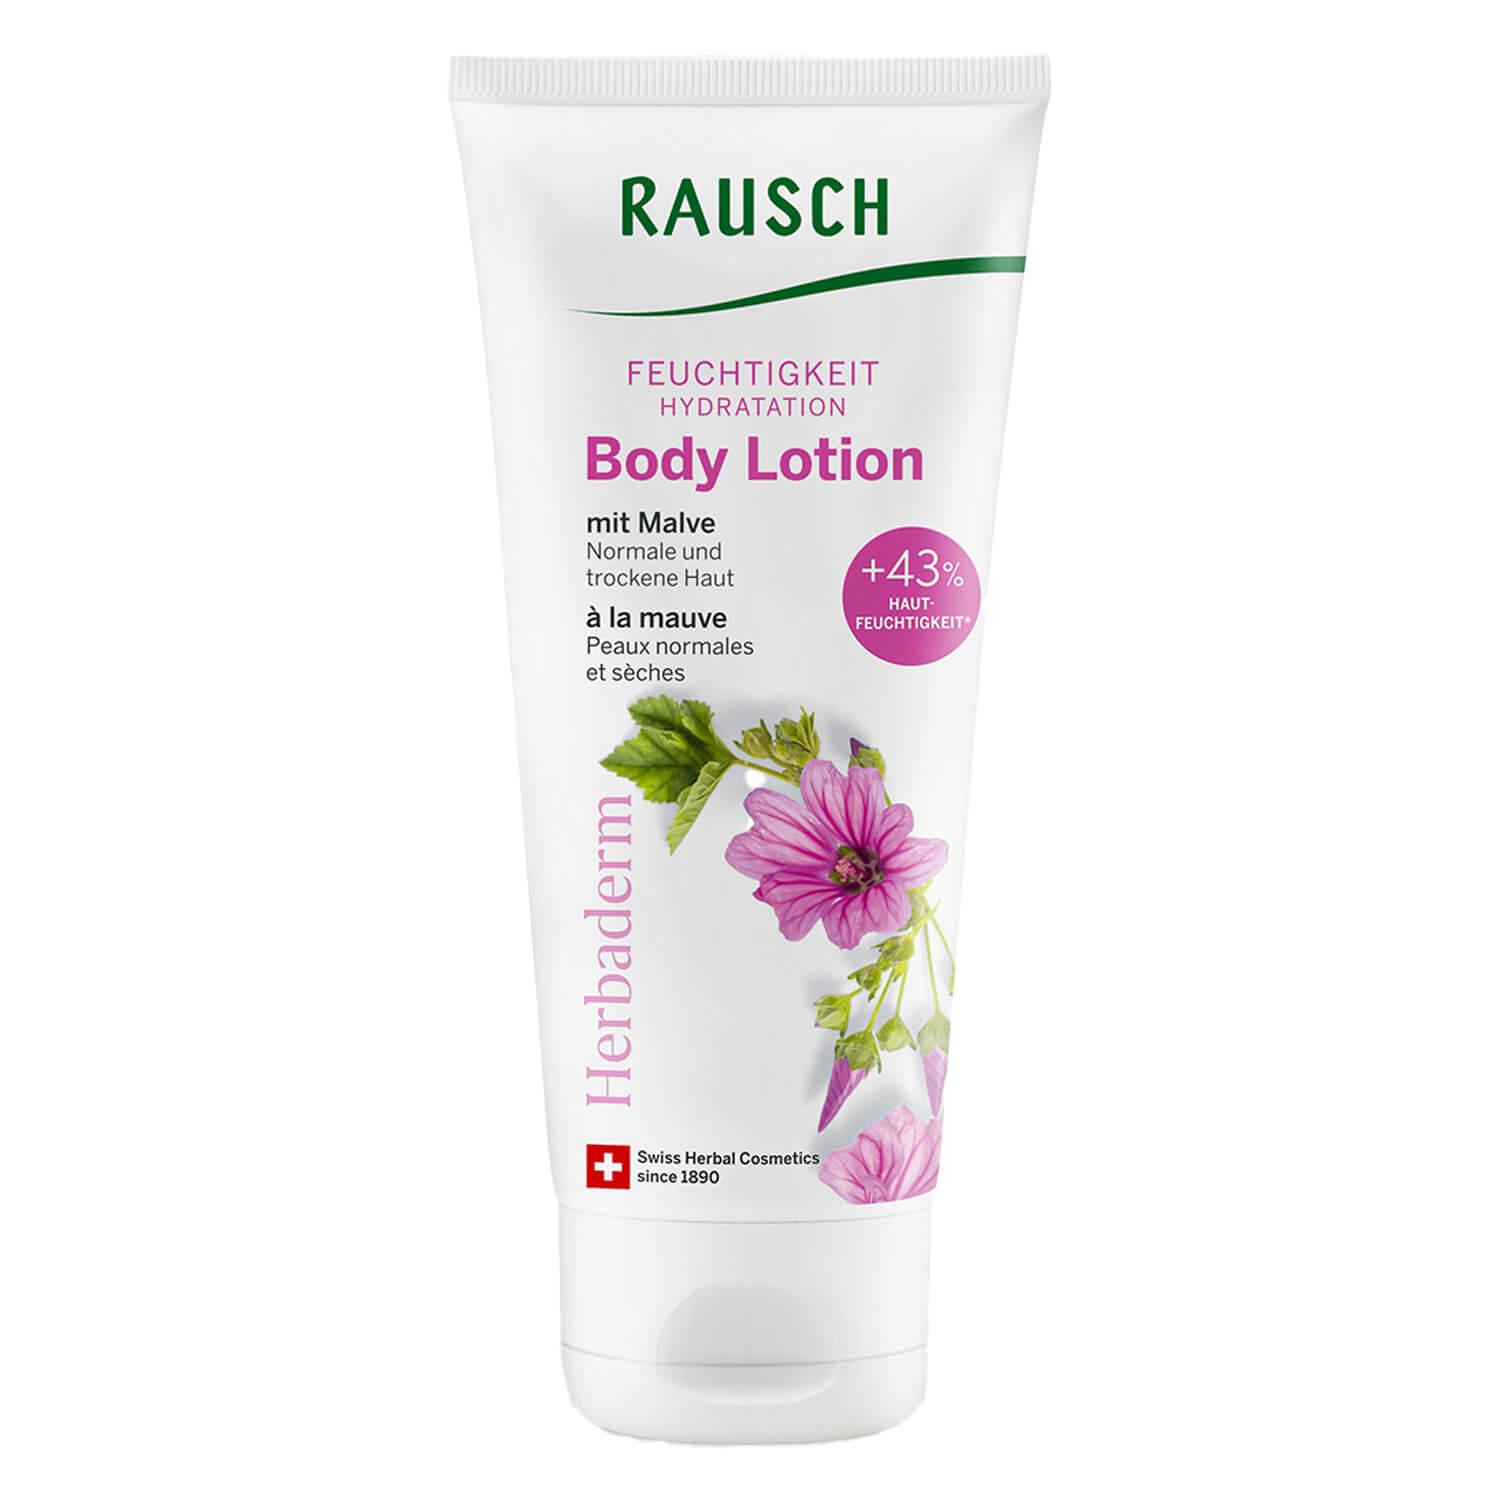 RAUSCH Body - Hydration Body Lotion with mallow